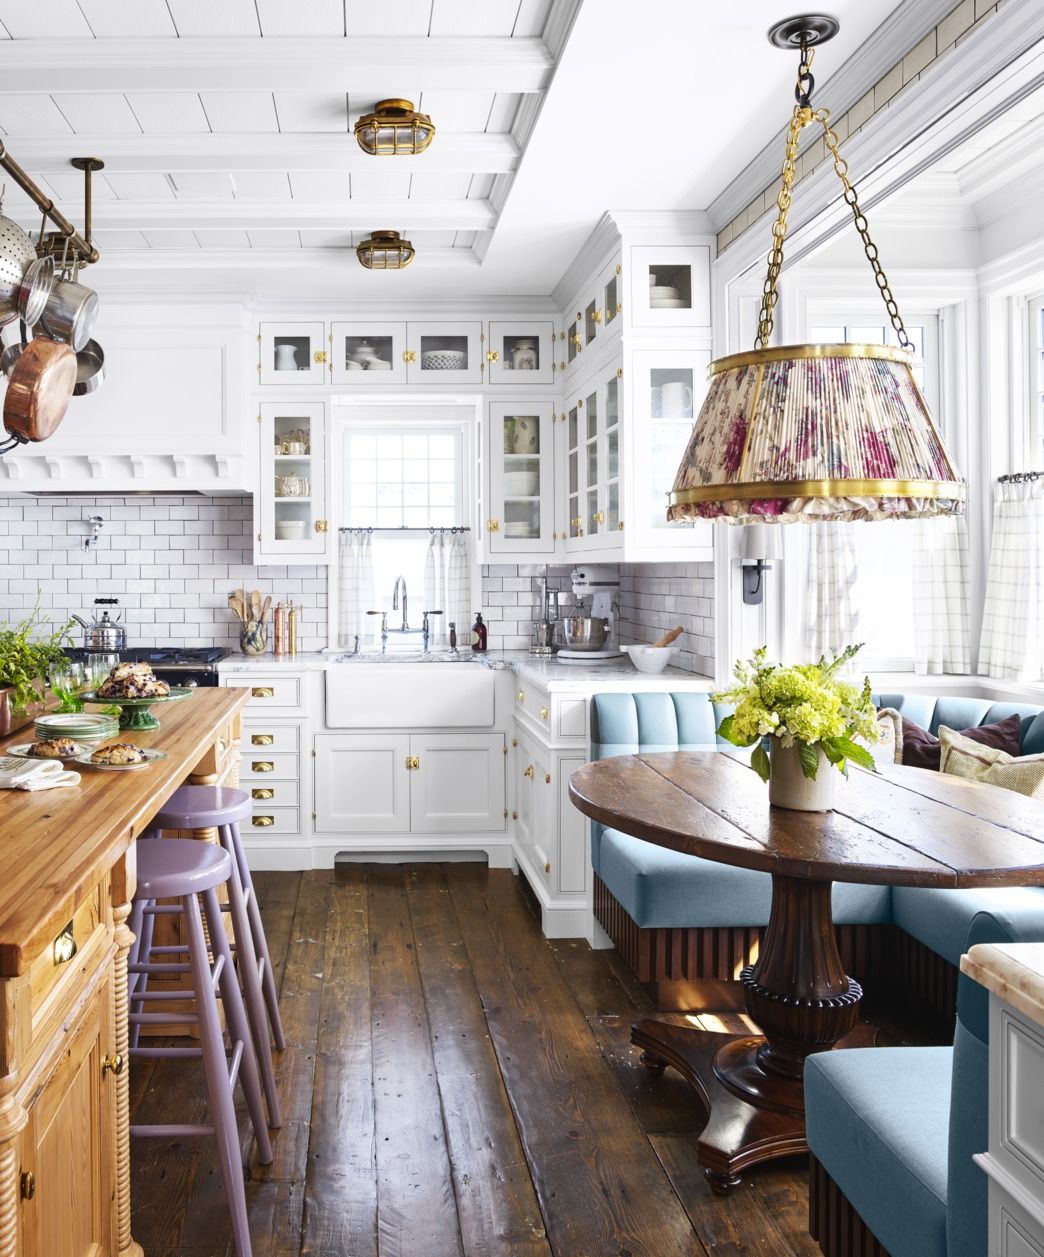 https://hips.hearstapps.com/hmg-prod/images/breakfast-nook-ideas-old-and-new-1580508700.jpg